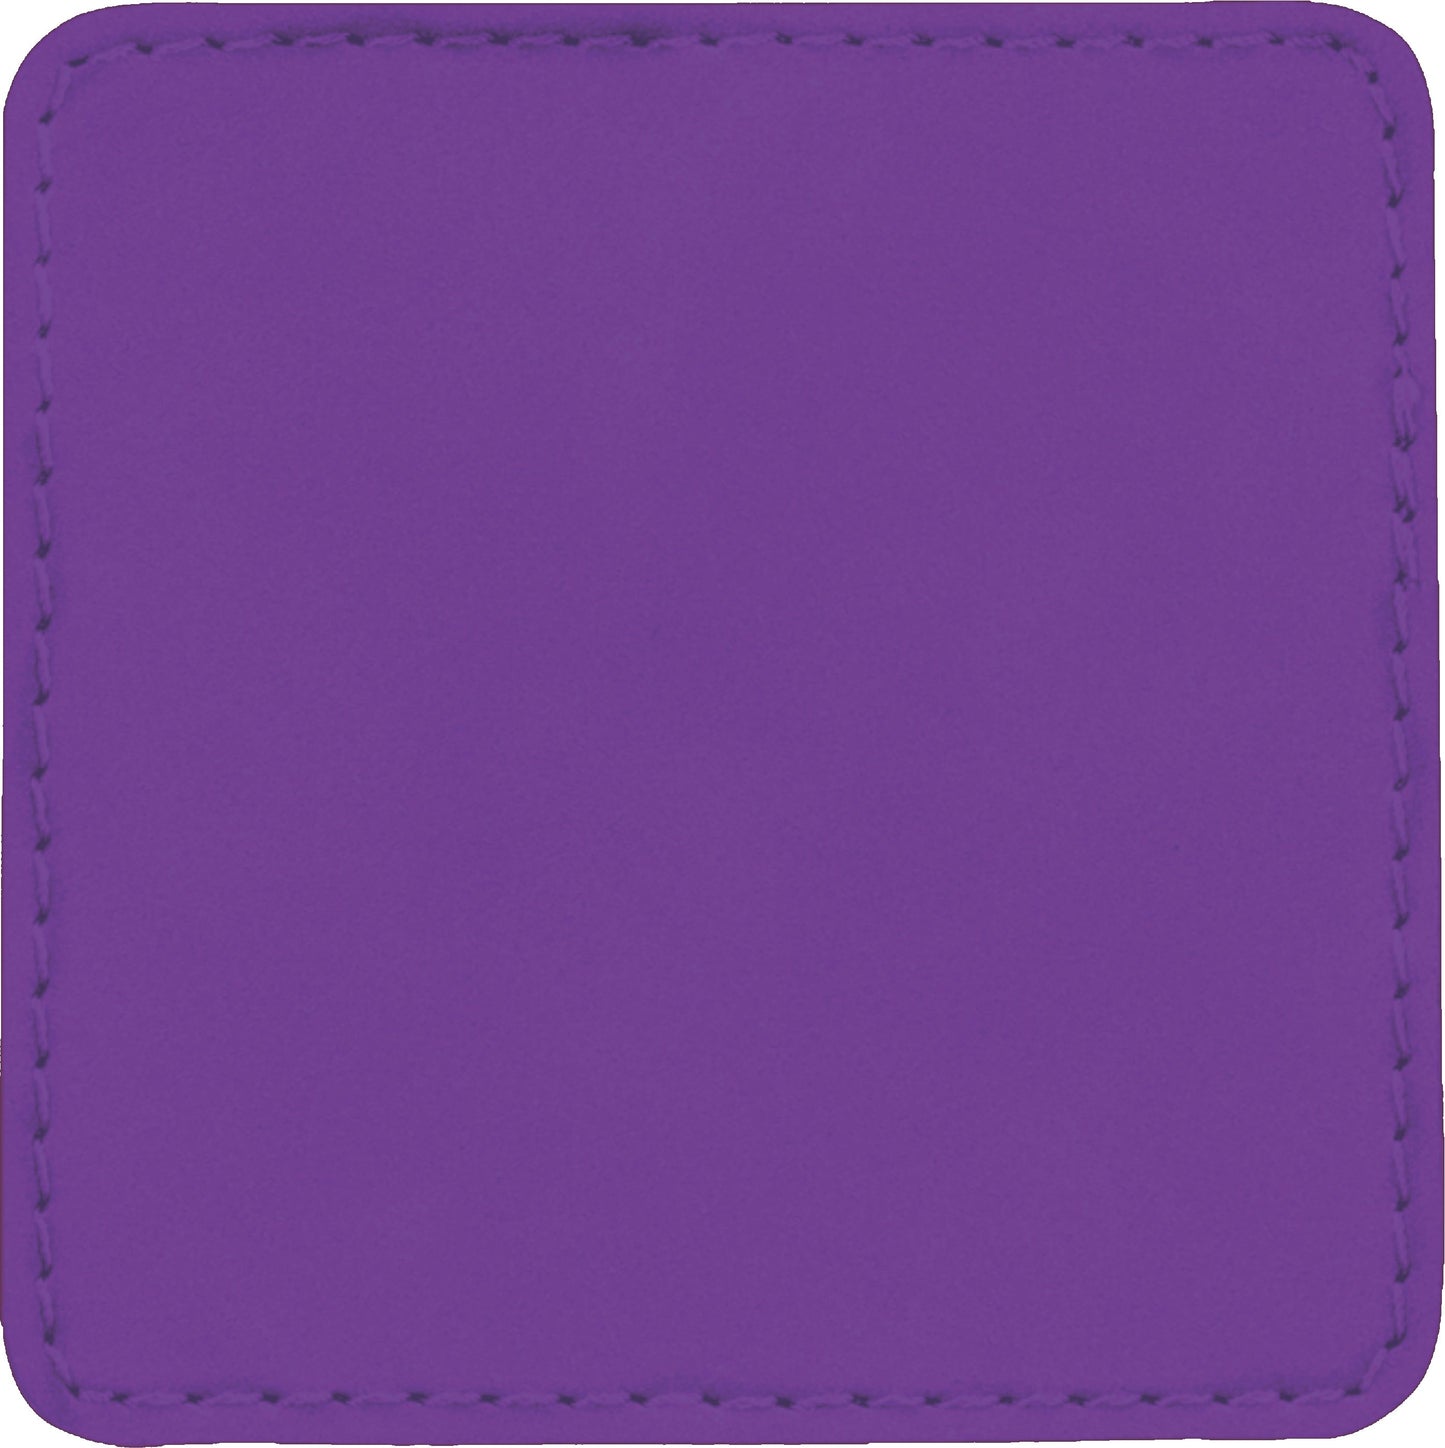 2 1/2" x 2 1/2" Square Purple Laserable/DTF/UV DTF Leatherette Patch with Heat Adhesive